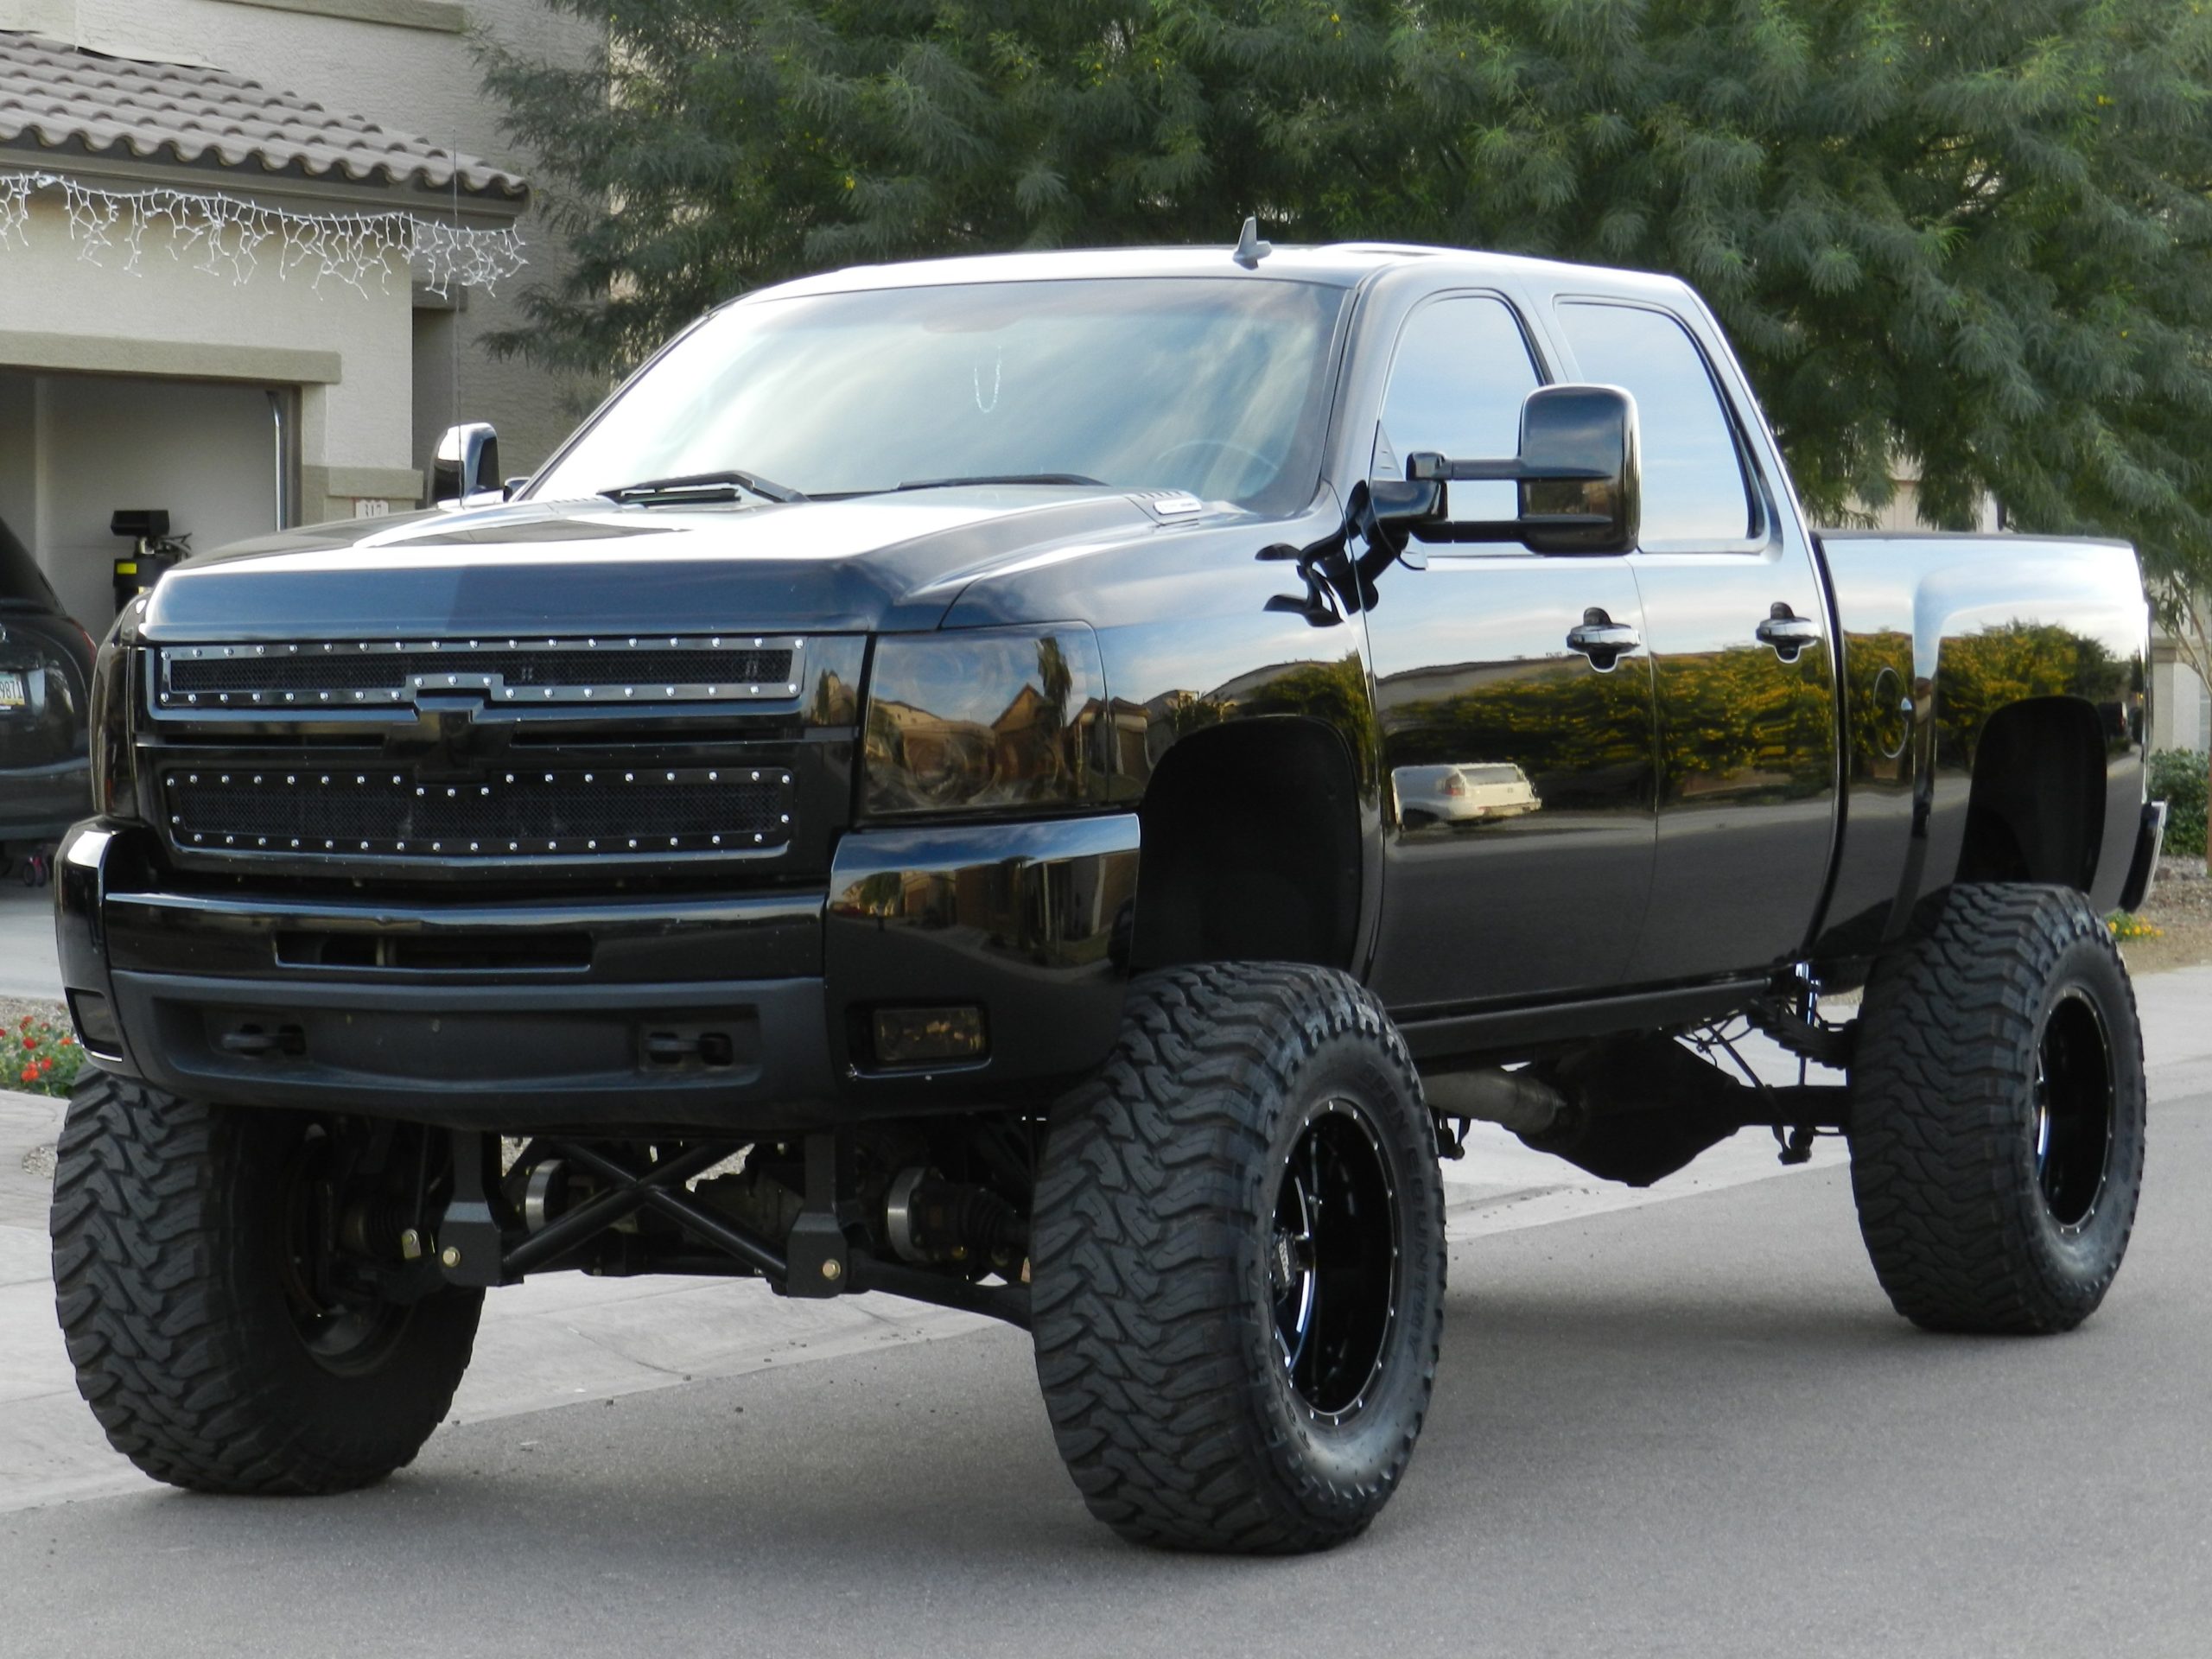 Lifted Chevy Truck Wallpaper Book Source for free download HD, 4K & high quality wallpaper